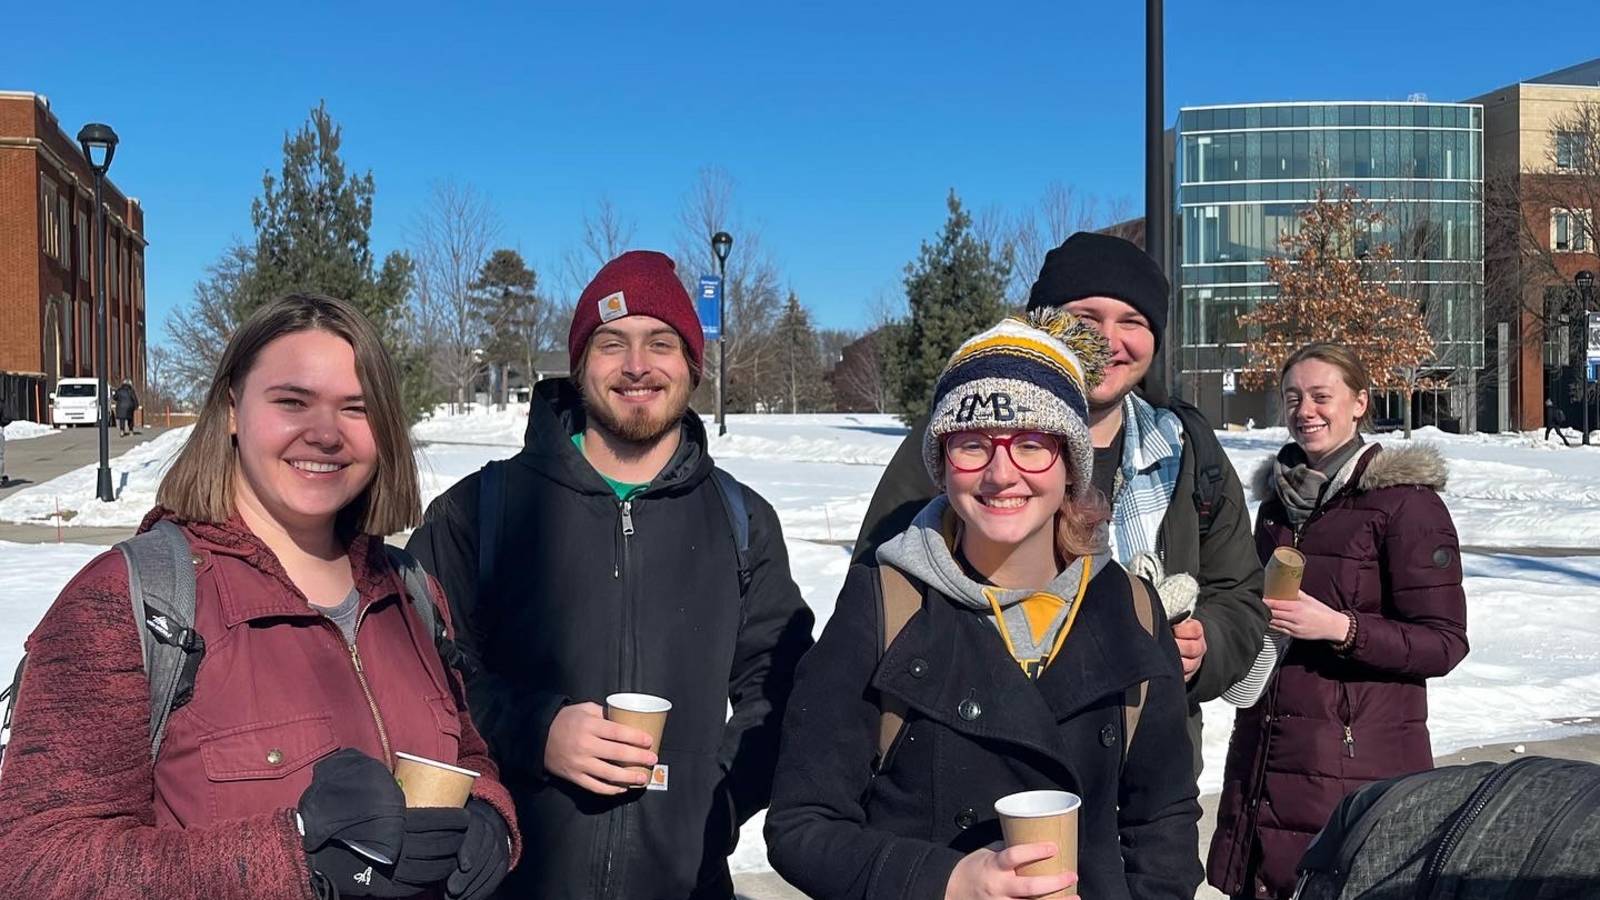 students smiling outside in winter